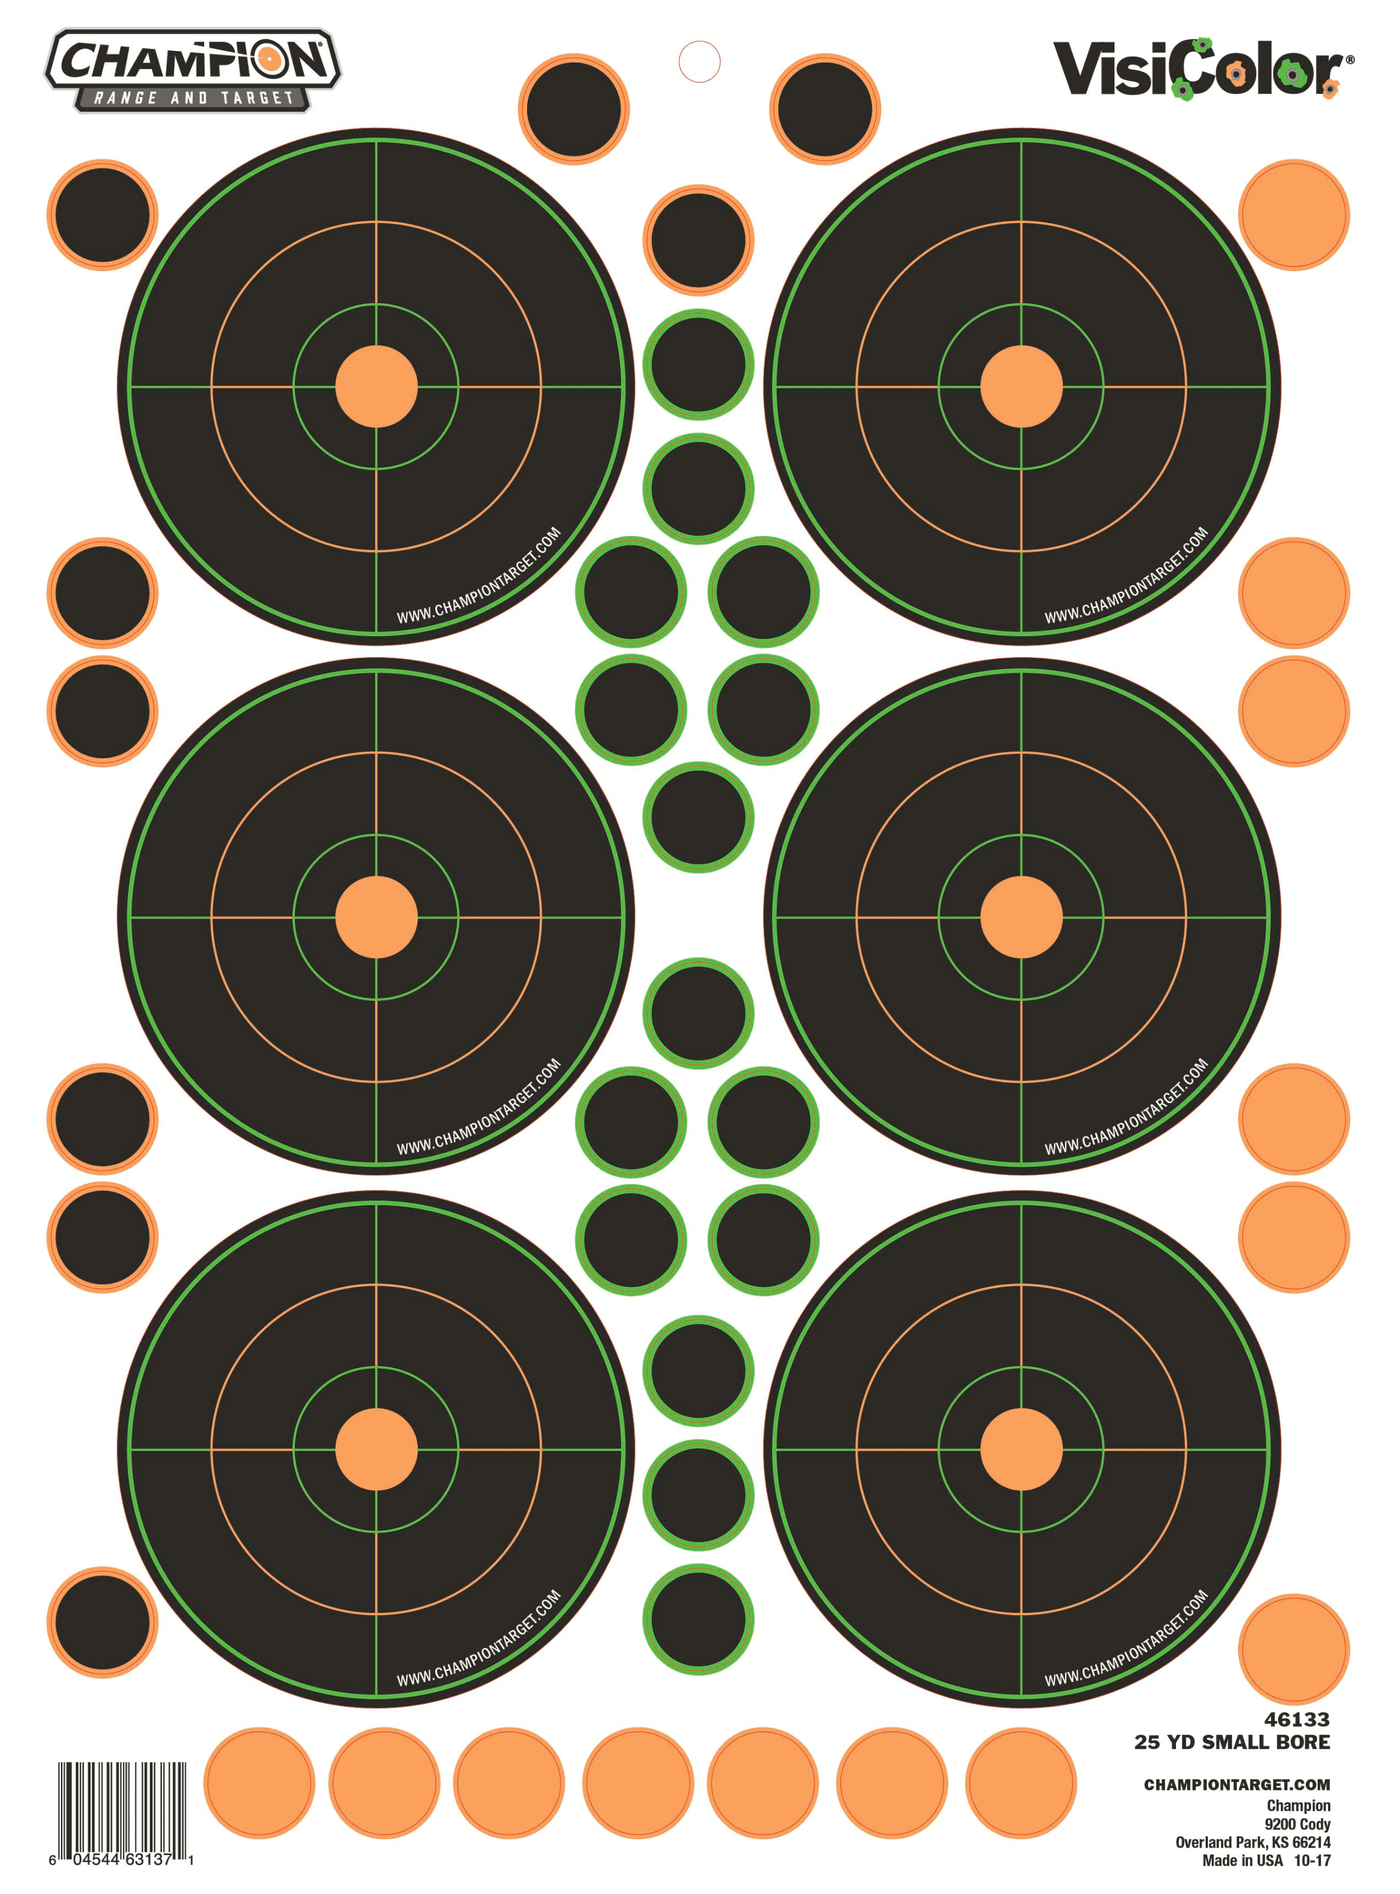 Champion Targets Champion Targets Visicolor, Champ 46133 25yd Small Bore 5pk W/90 Pasters Shooting